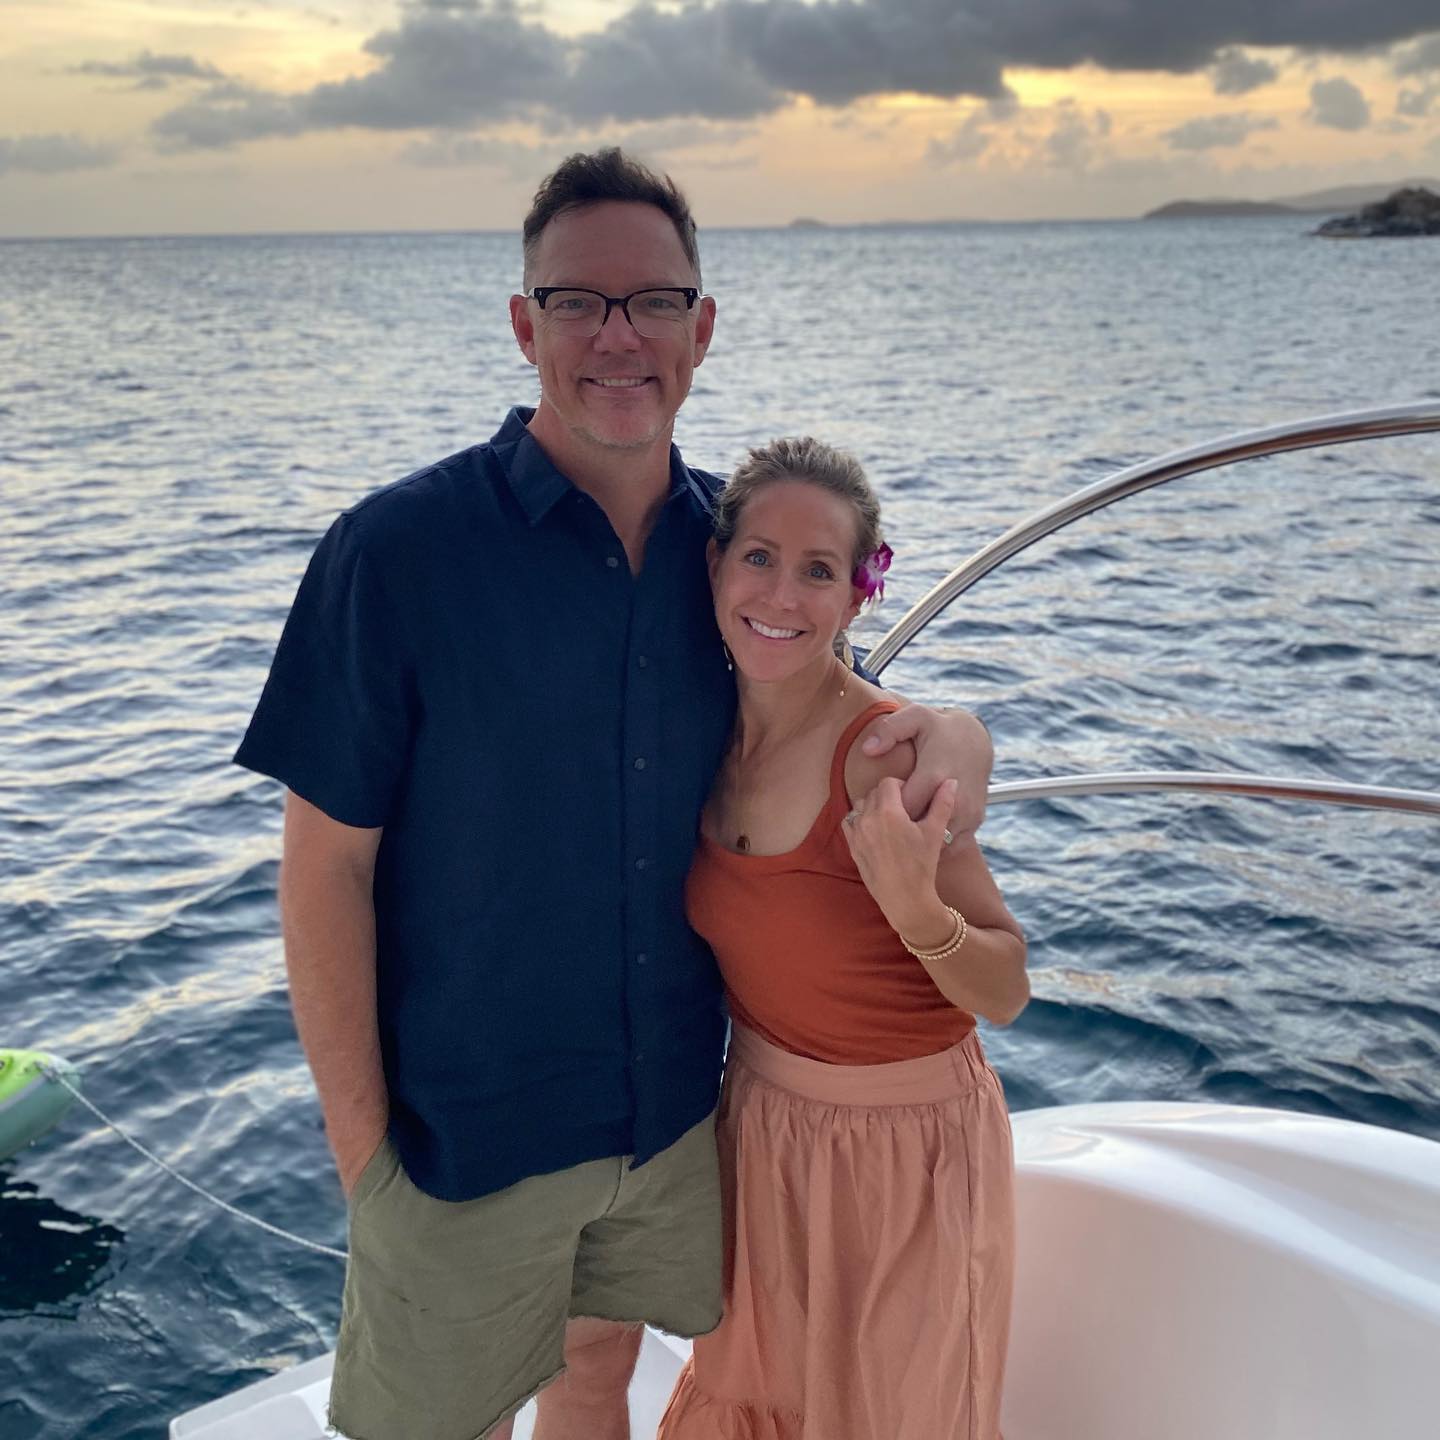 Matthew Lillard standing on a boat with his wife, Heather Helm